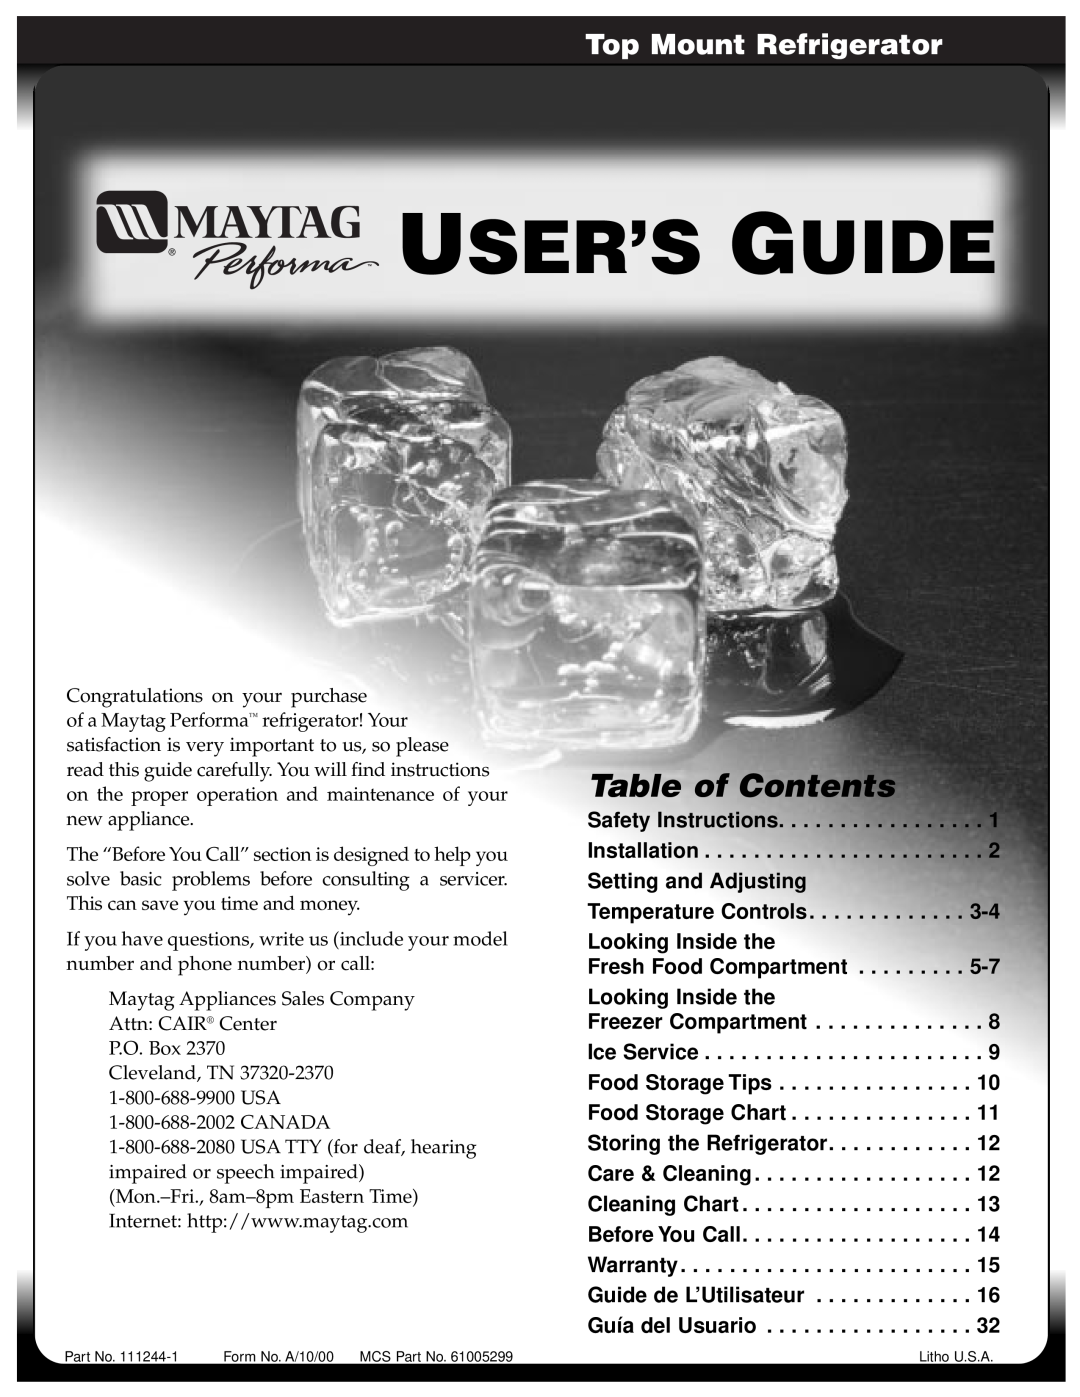 Maytag 61005299 warranty User’S Guide, Table of Contents, Top Mount Refrigerator 